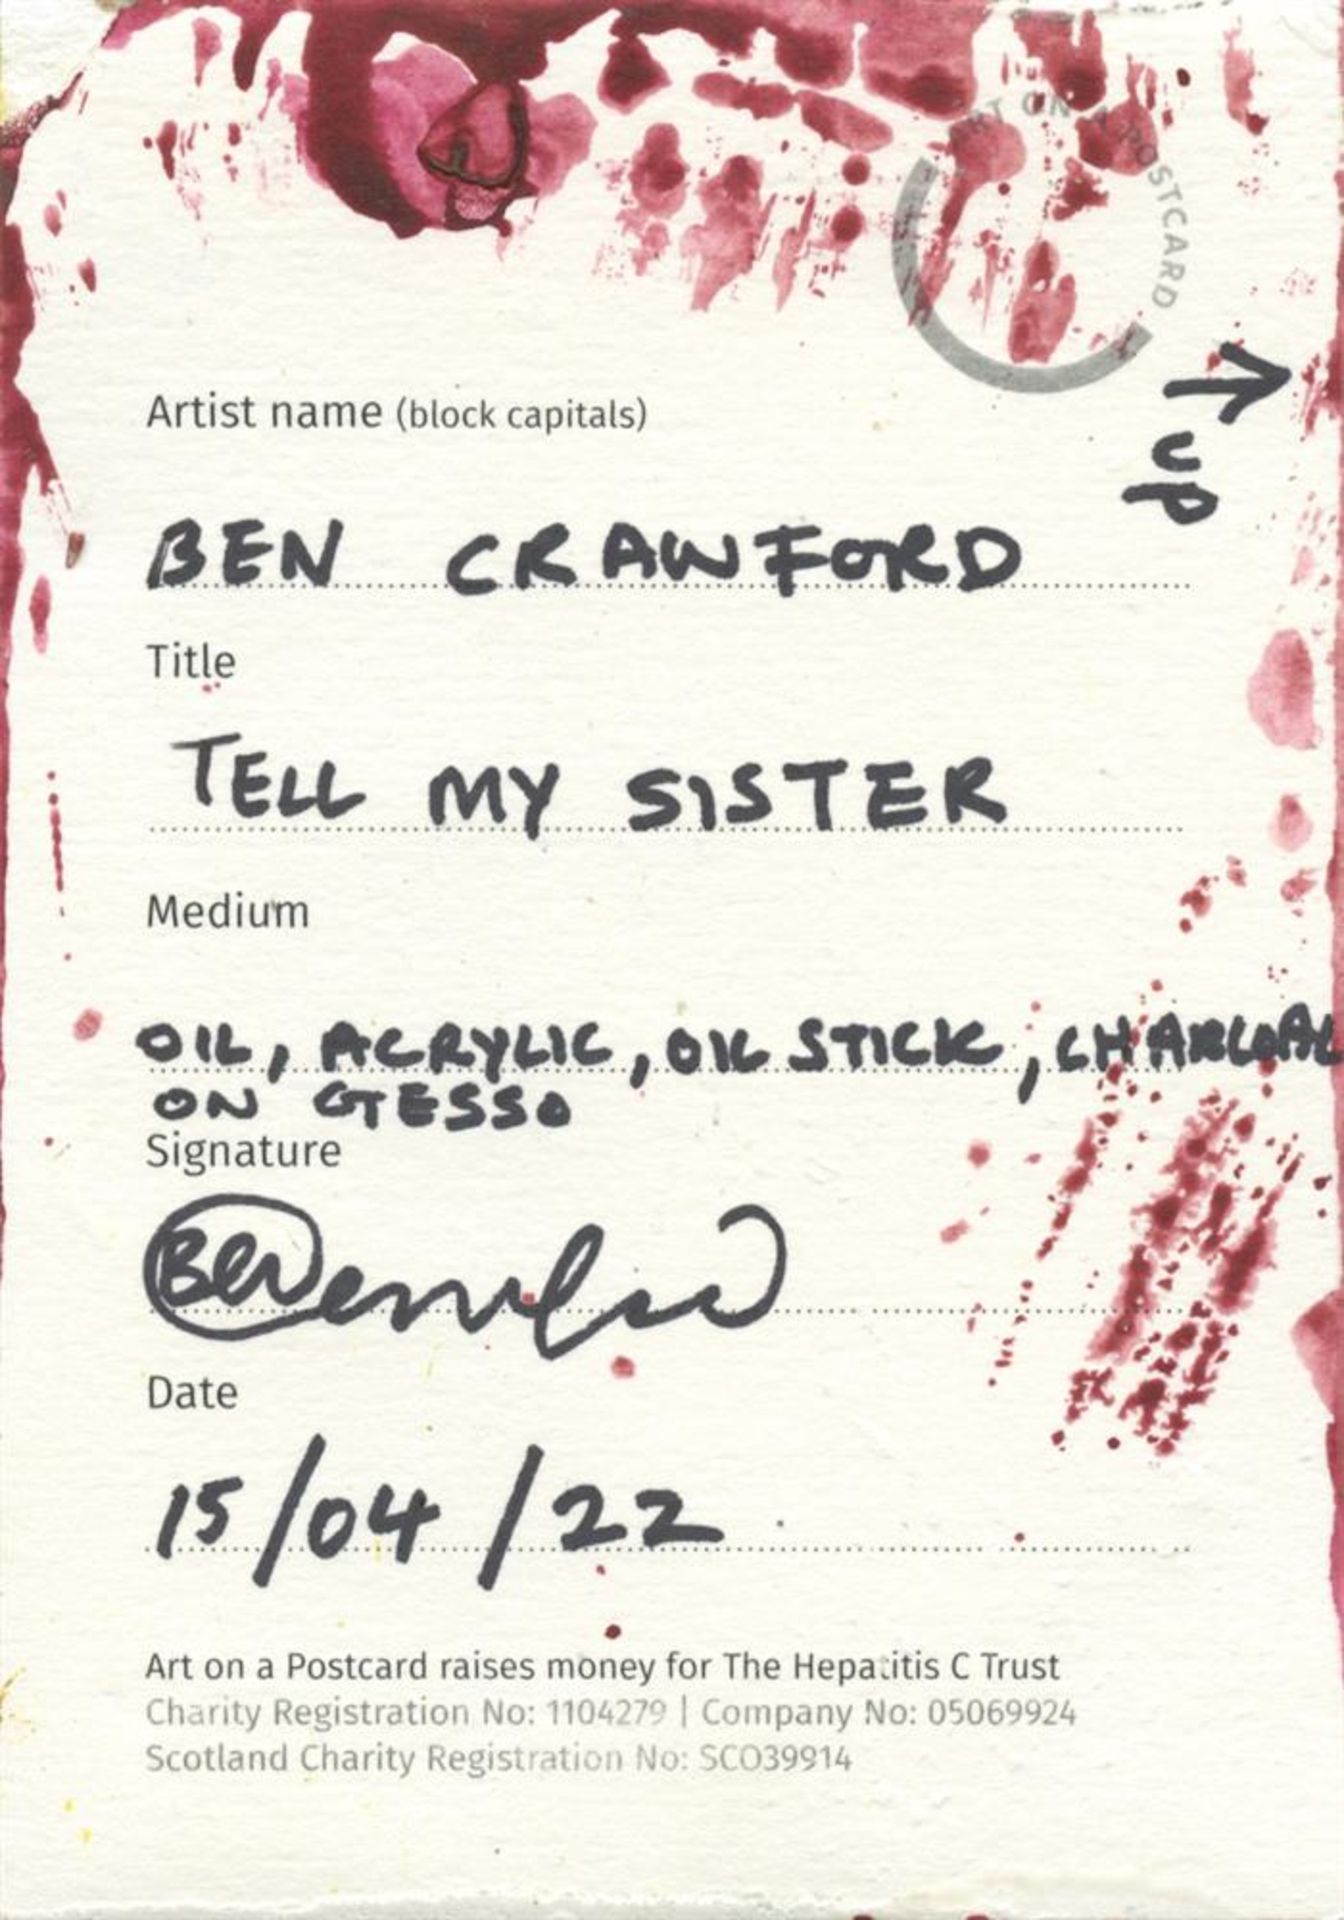 Ben Crawford,Tell My Sister, 2022 - Image 2 of 3